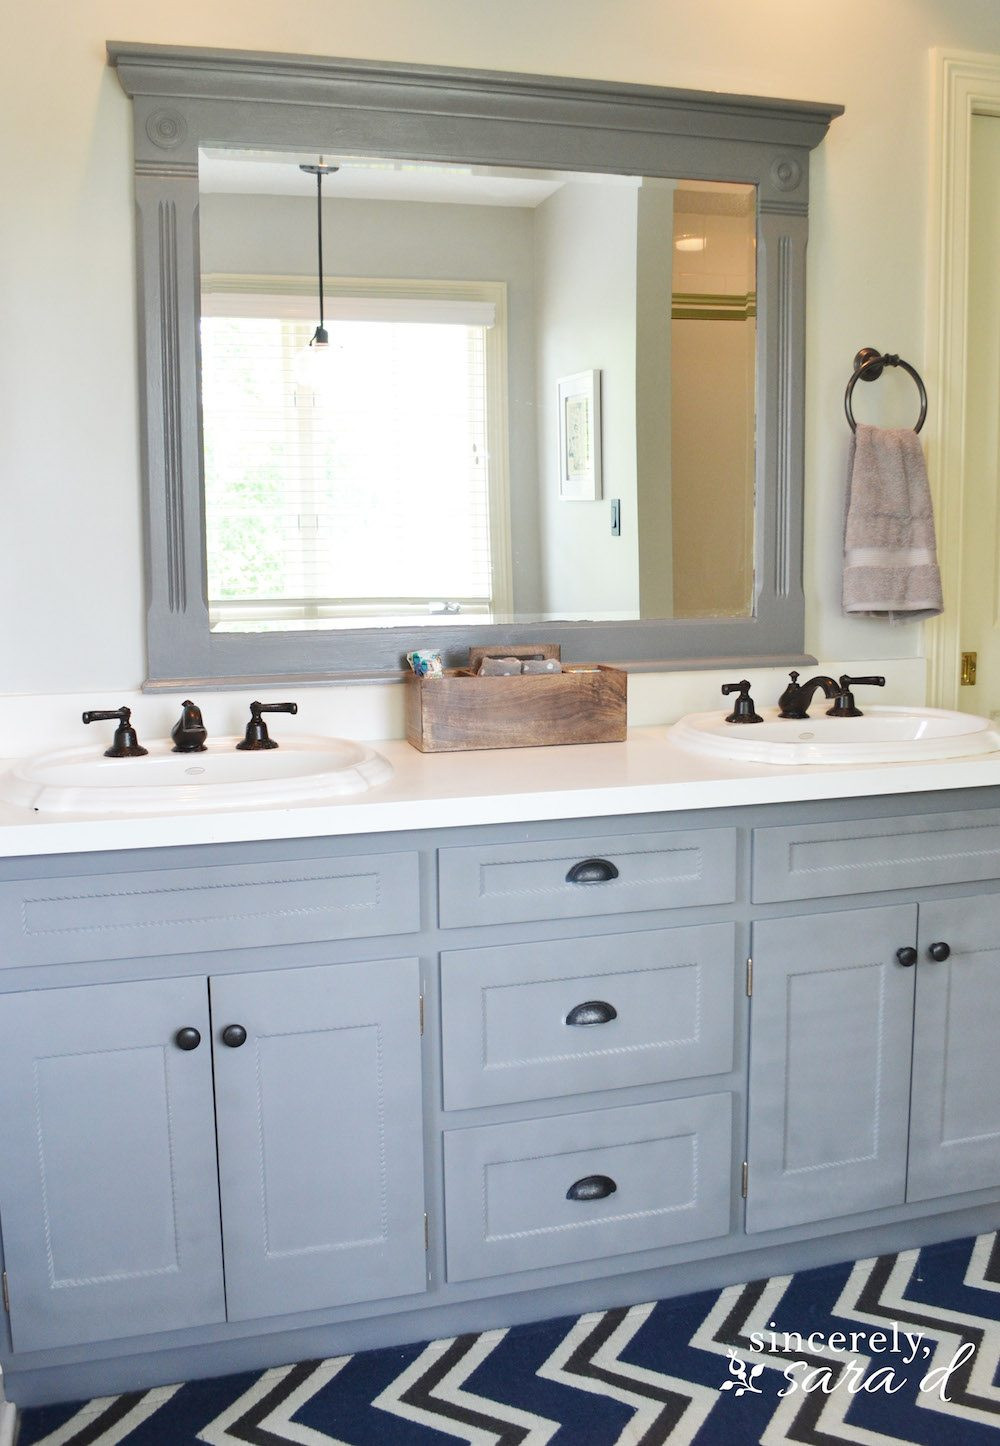 Cabinets To Go Bathroom Vanity
 Painting Cabinets and Using Shortcuts Sincerely Sara D